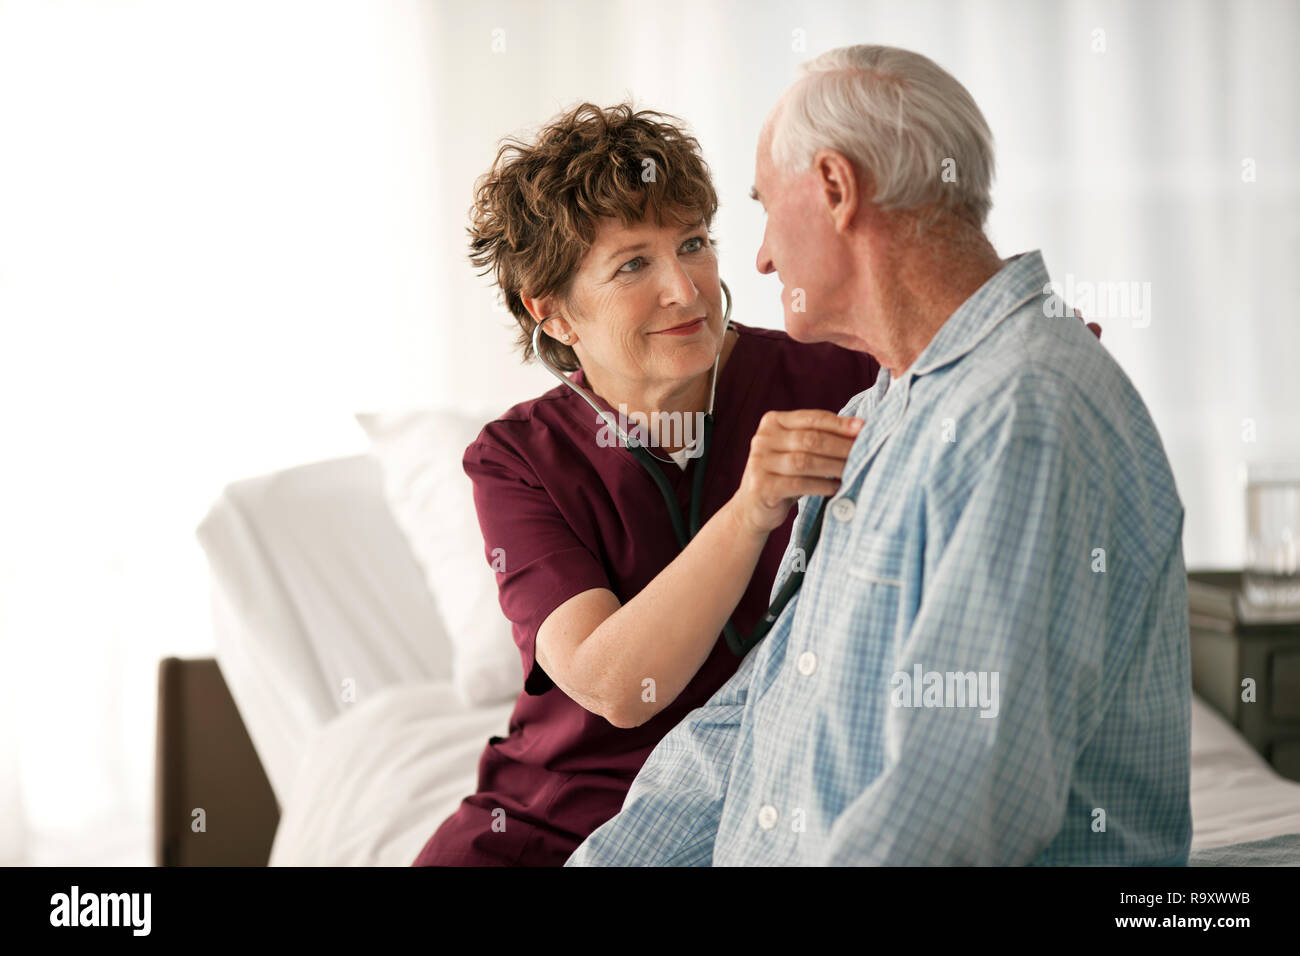 Mature nurse listening to the heartbeat of an elderly patient. Stock Photo